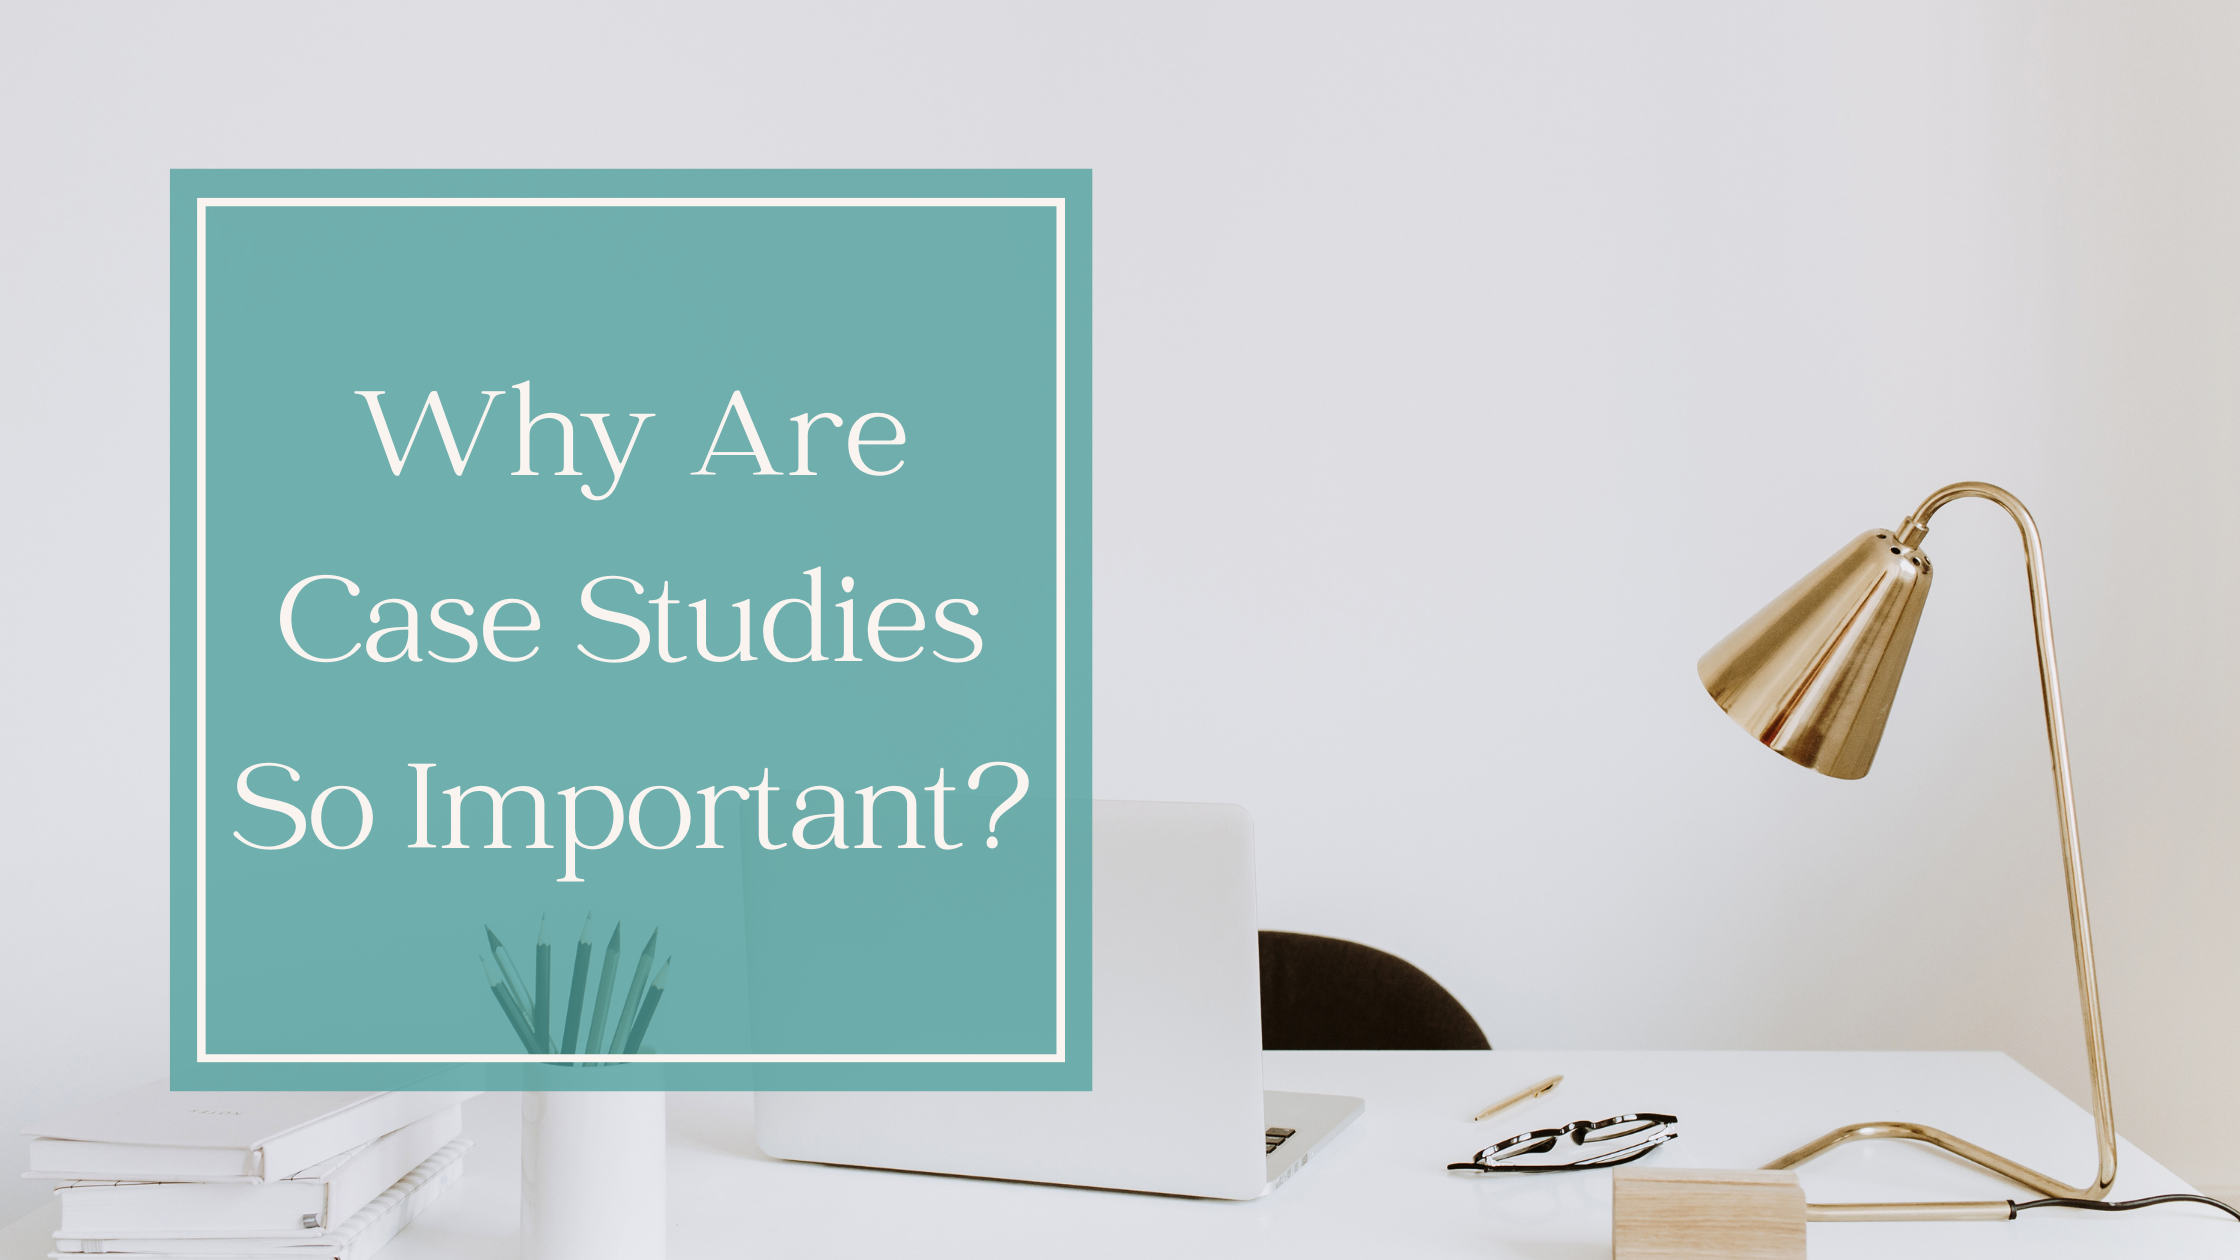 Why Are Case Studies So Important?